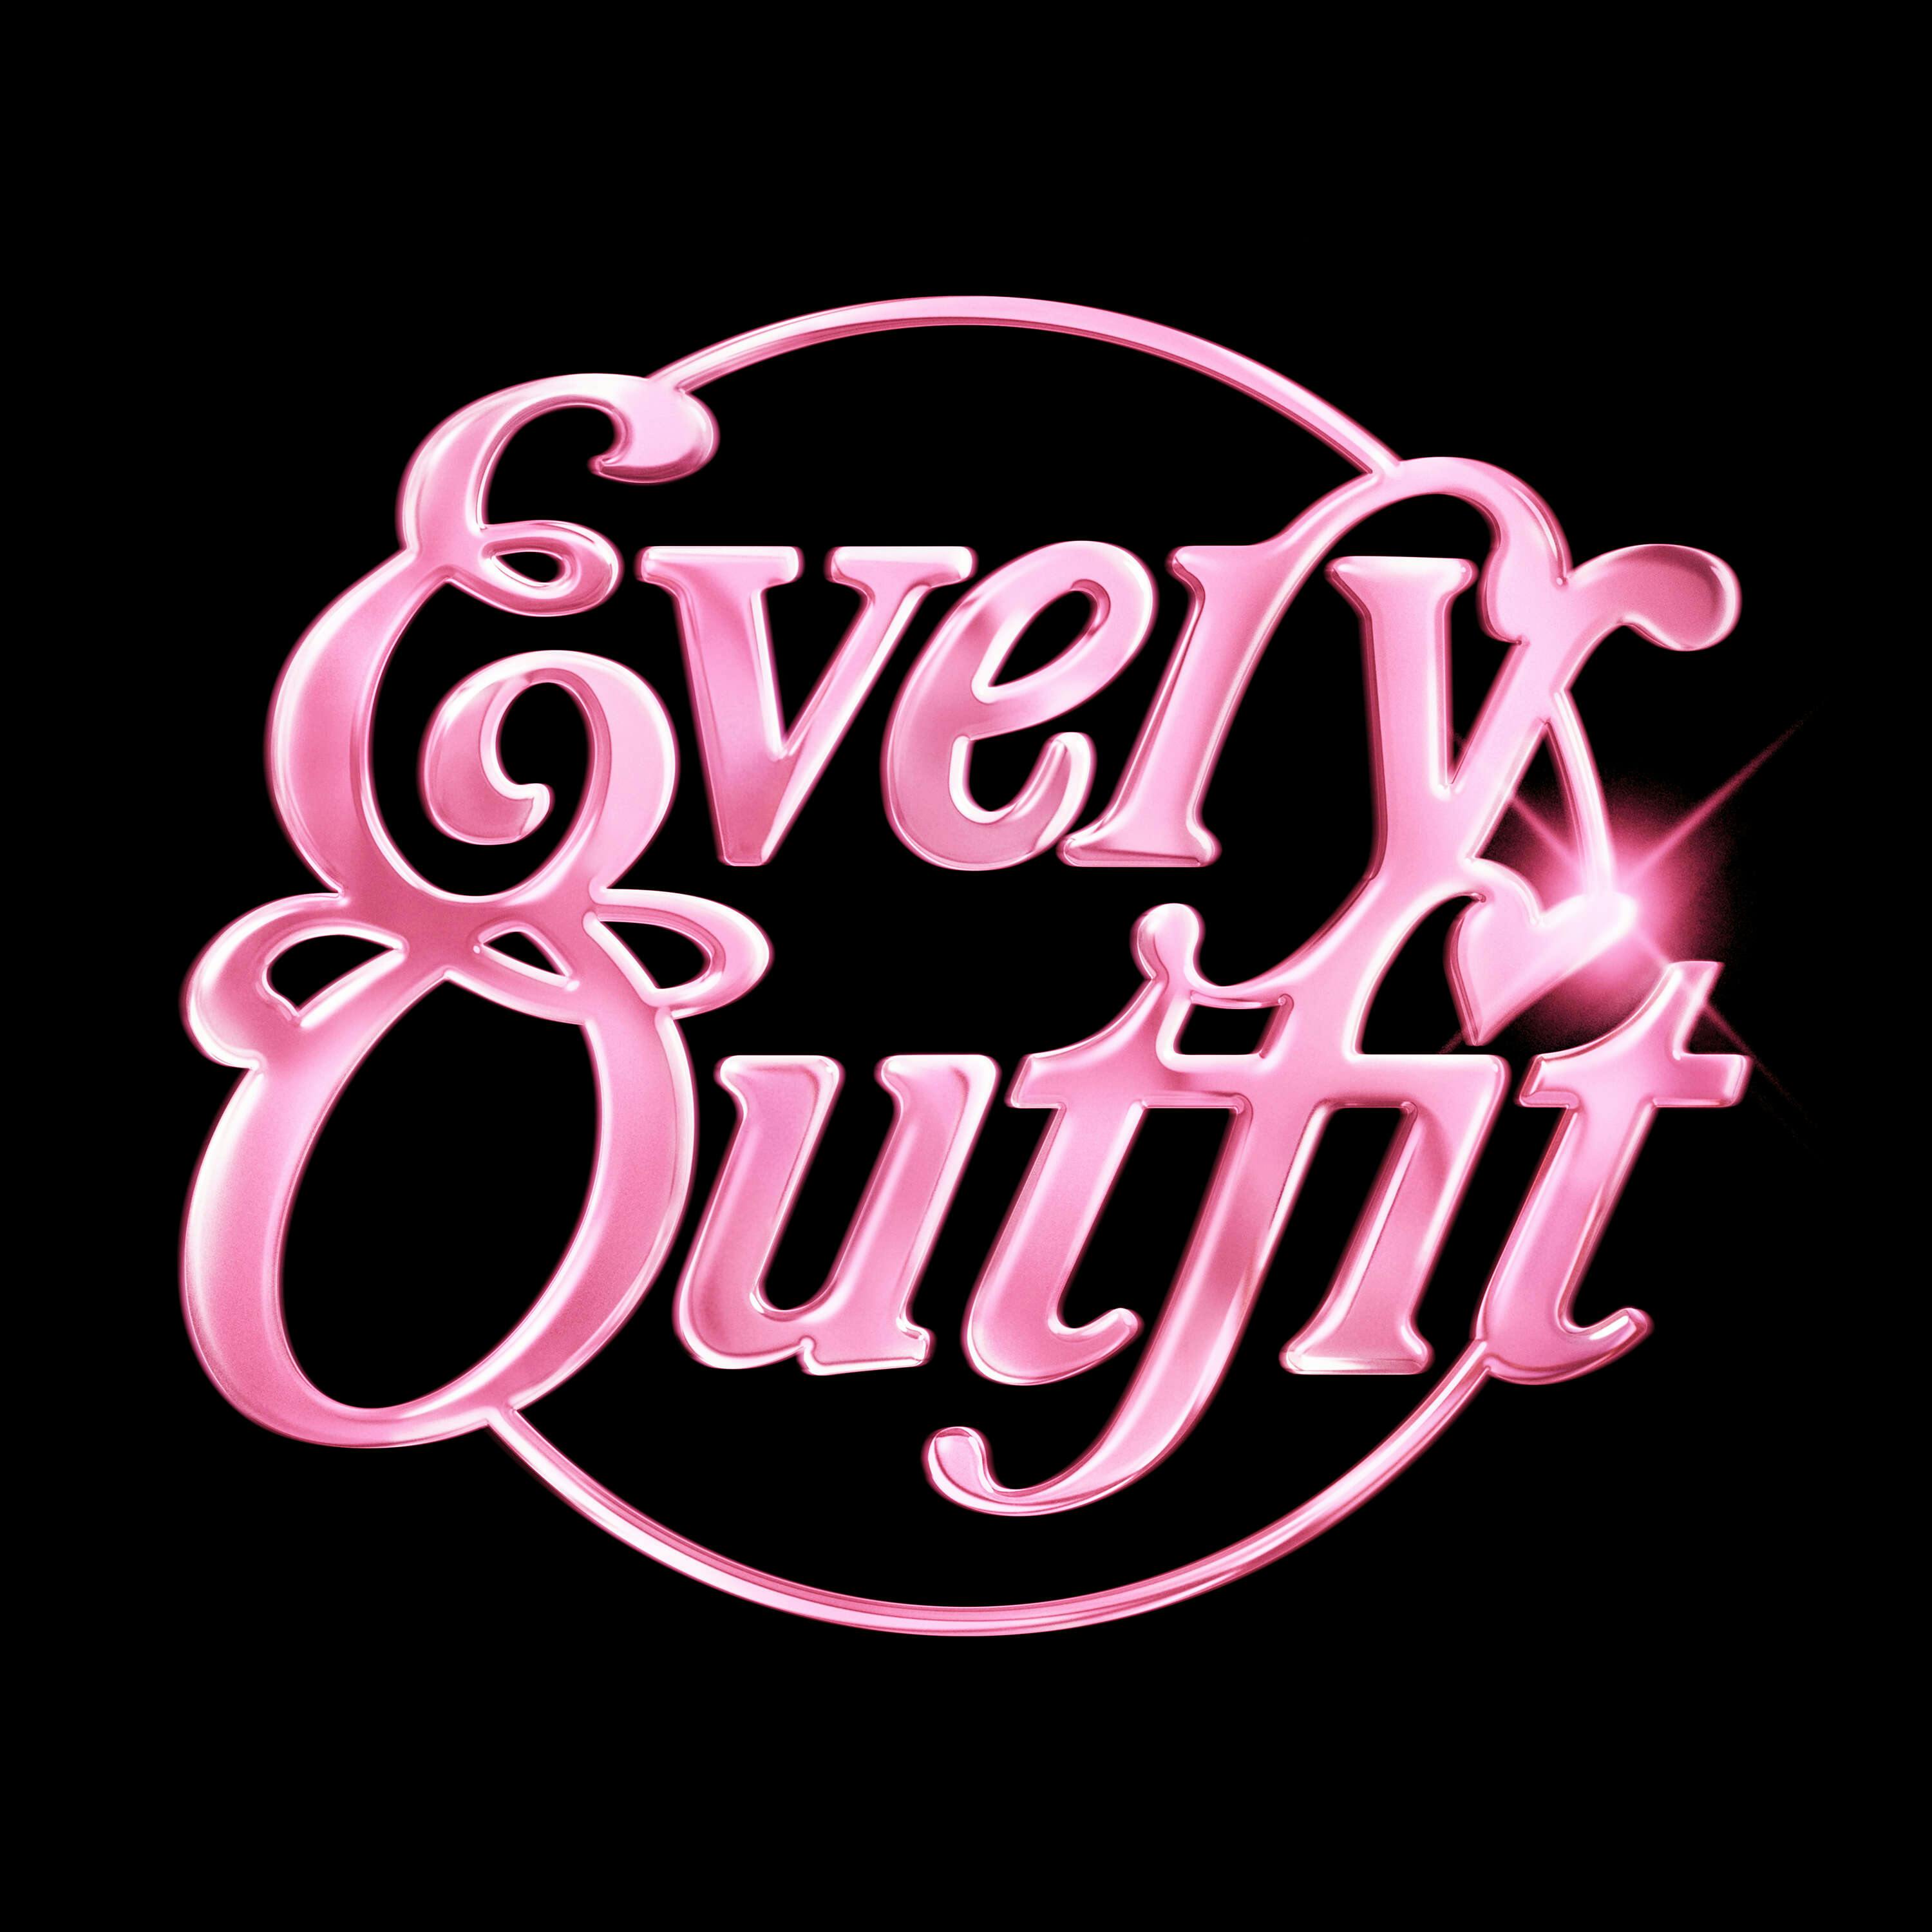 Every Outfit podcast show image